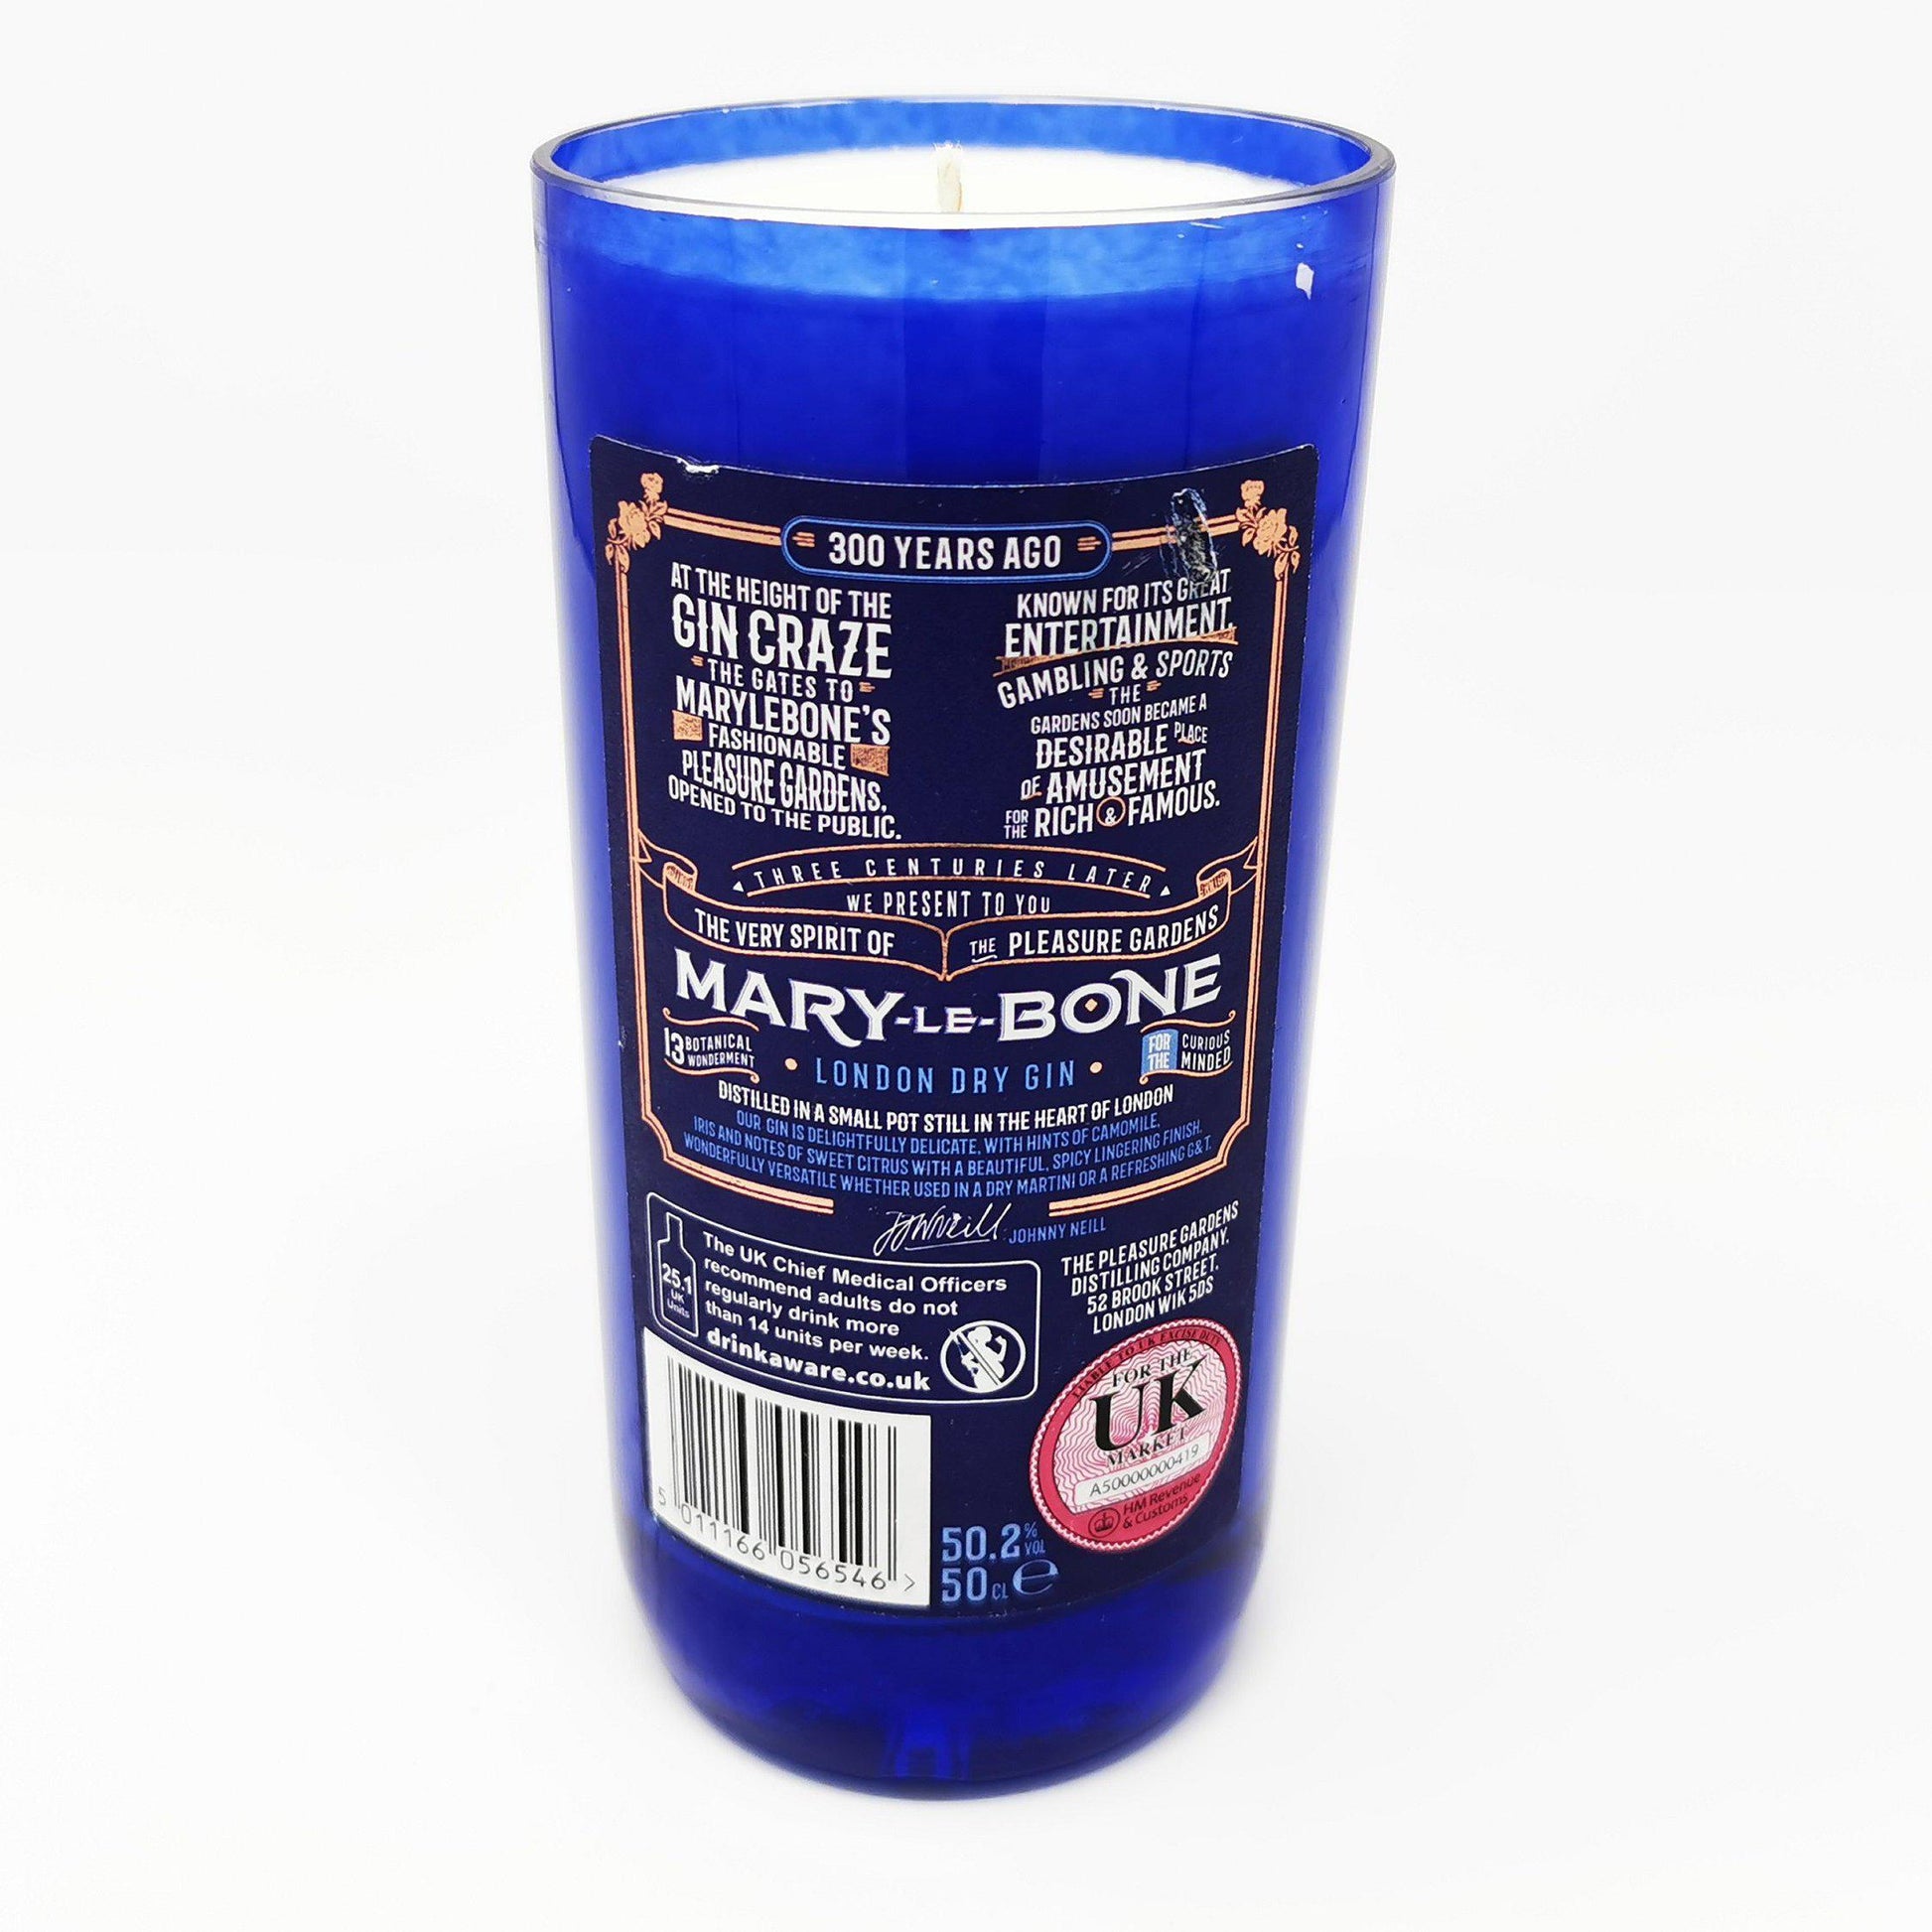 Mary Le Bone Gin Bottle Candle-Gin Bottle Candles-Adhock Homeware